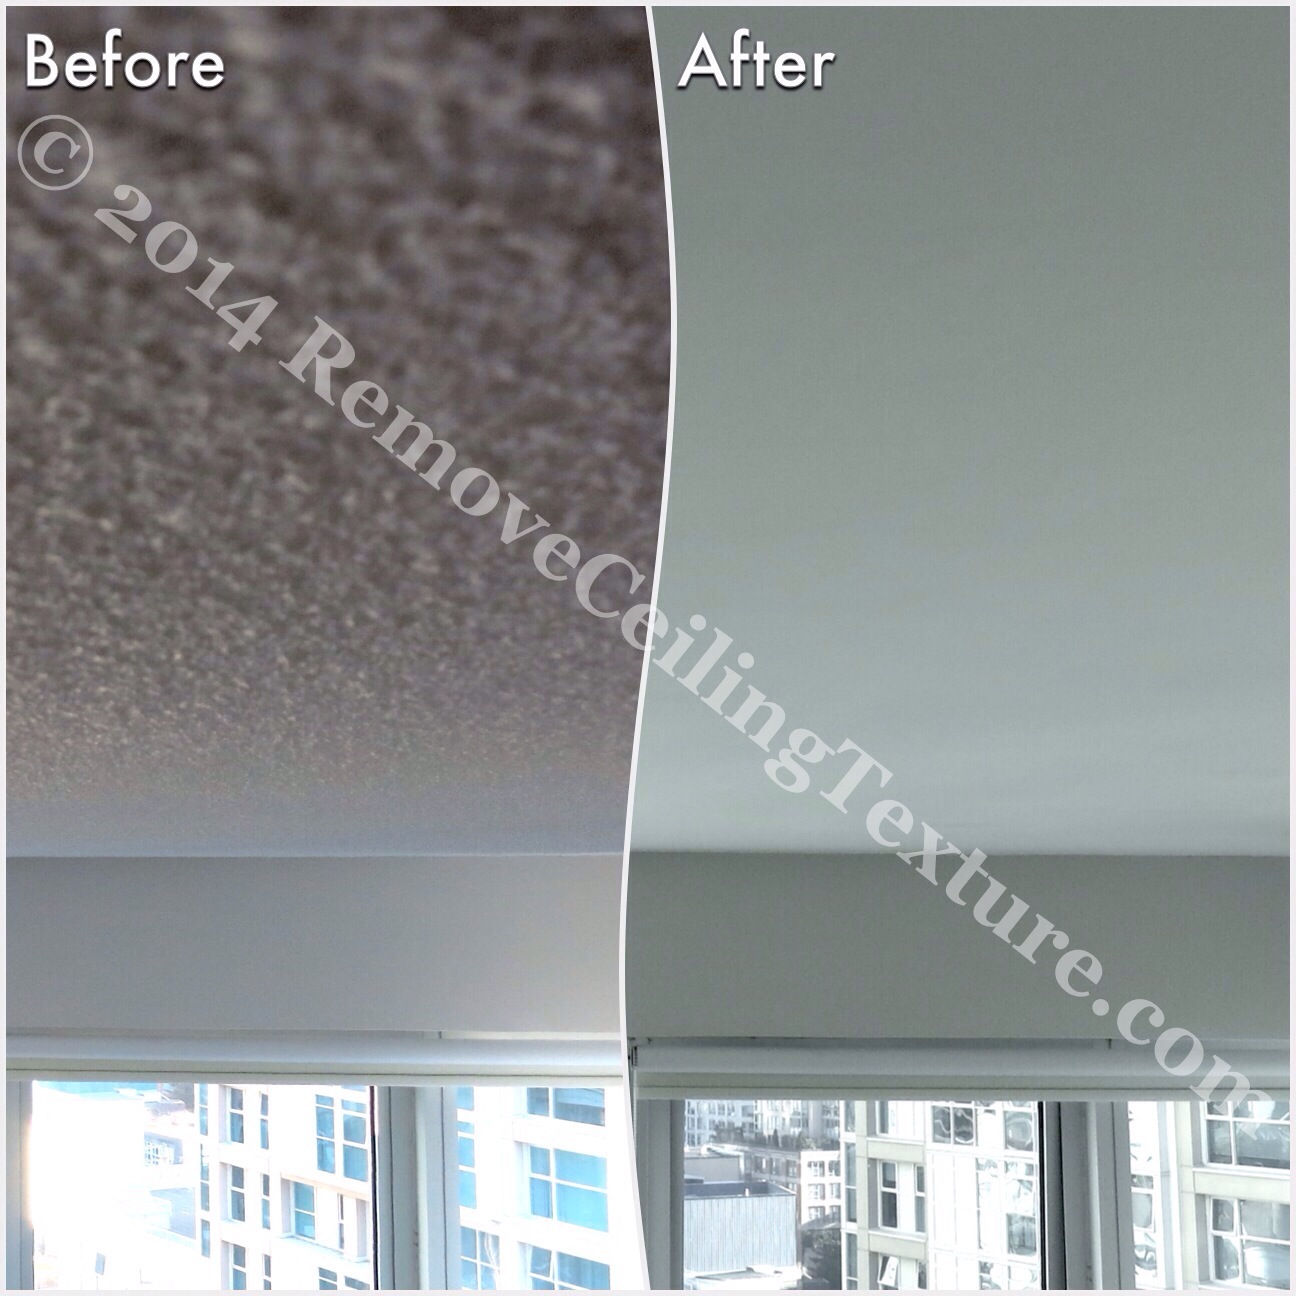 Once professional ceiling contractors were called in, the texture removal went smoothly: Living room with smooth ceilings - condo at 1331 Homer St, Vancouver